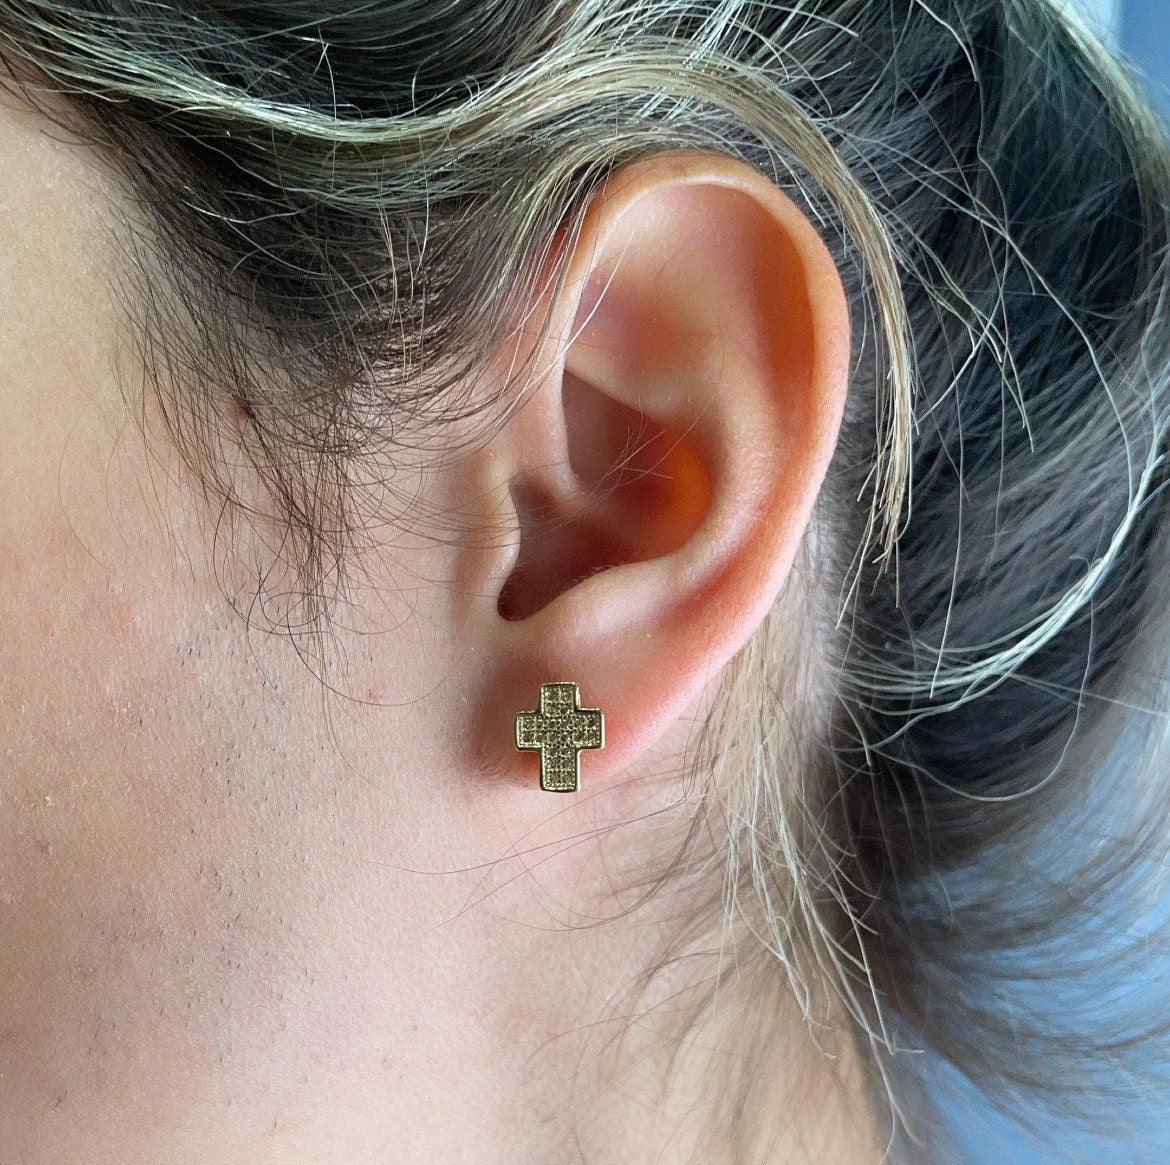 18k Gold Layered Design Pattern Casted Cross Stud Earrings Wholesale Jewelry